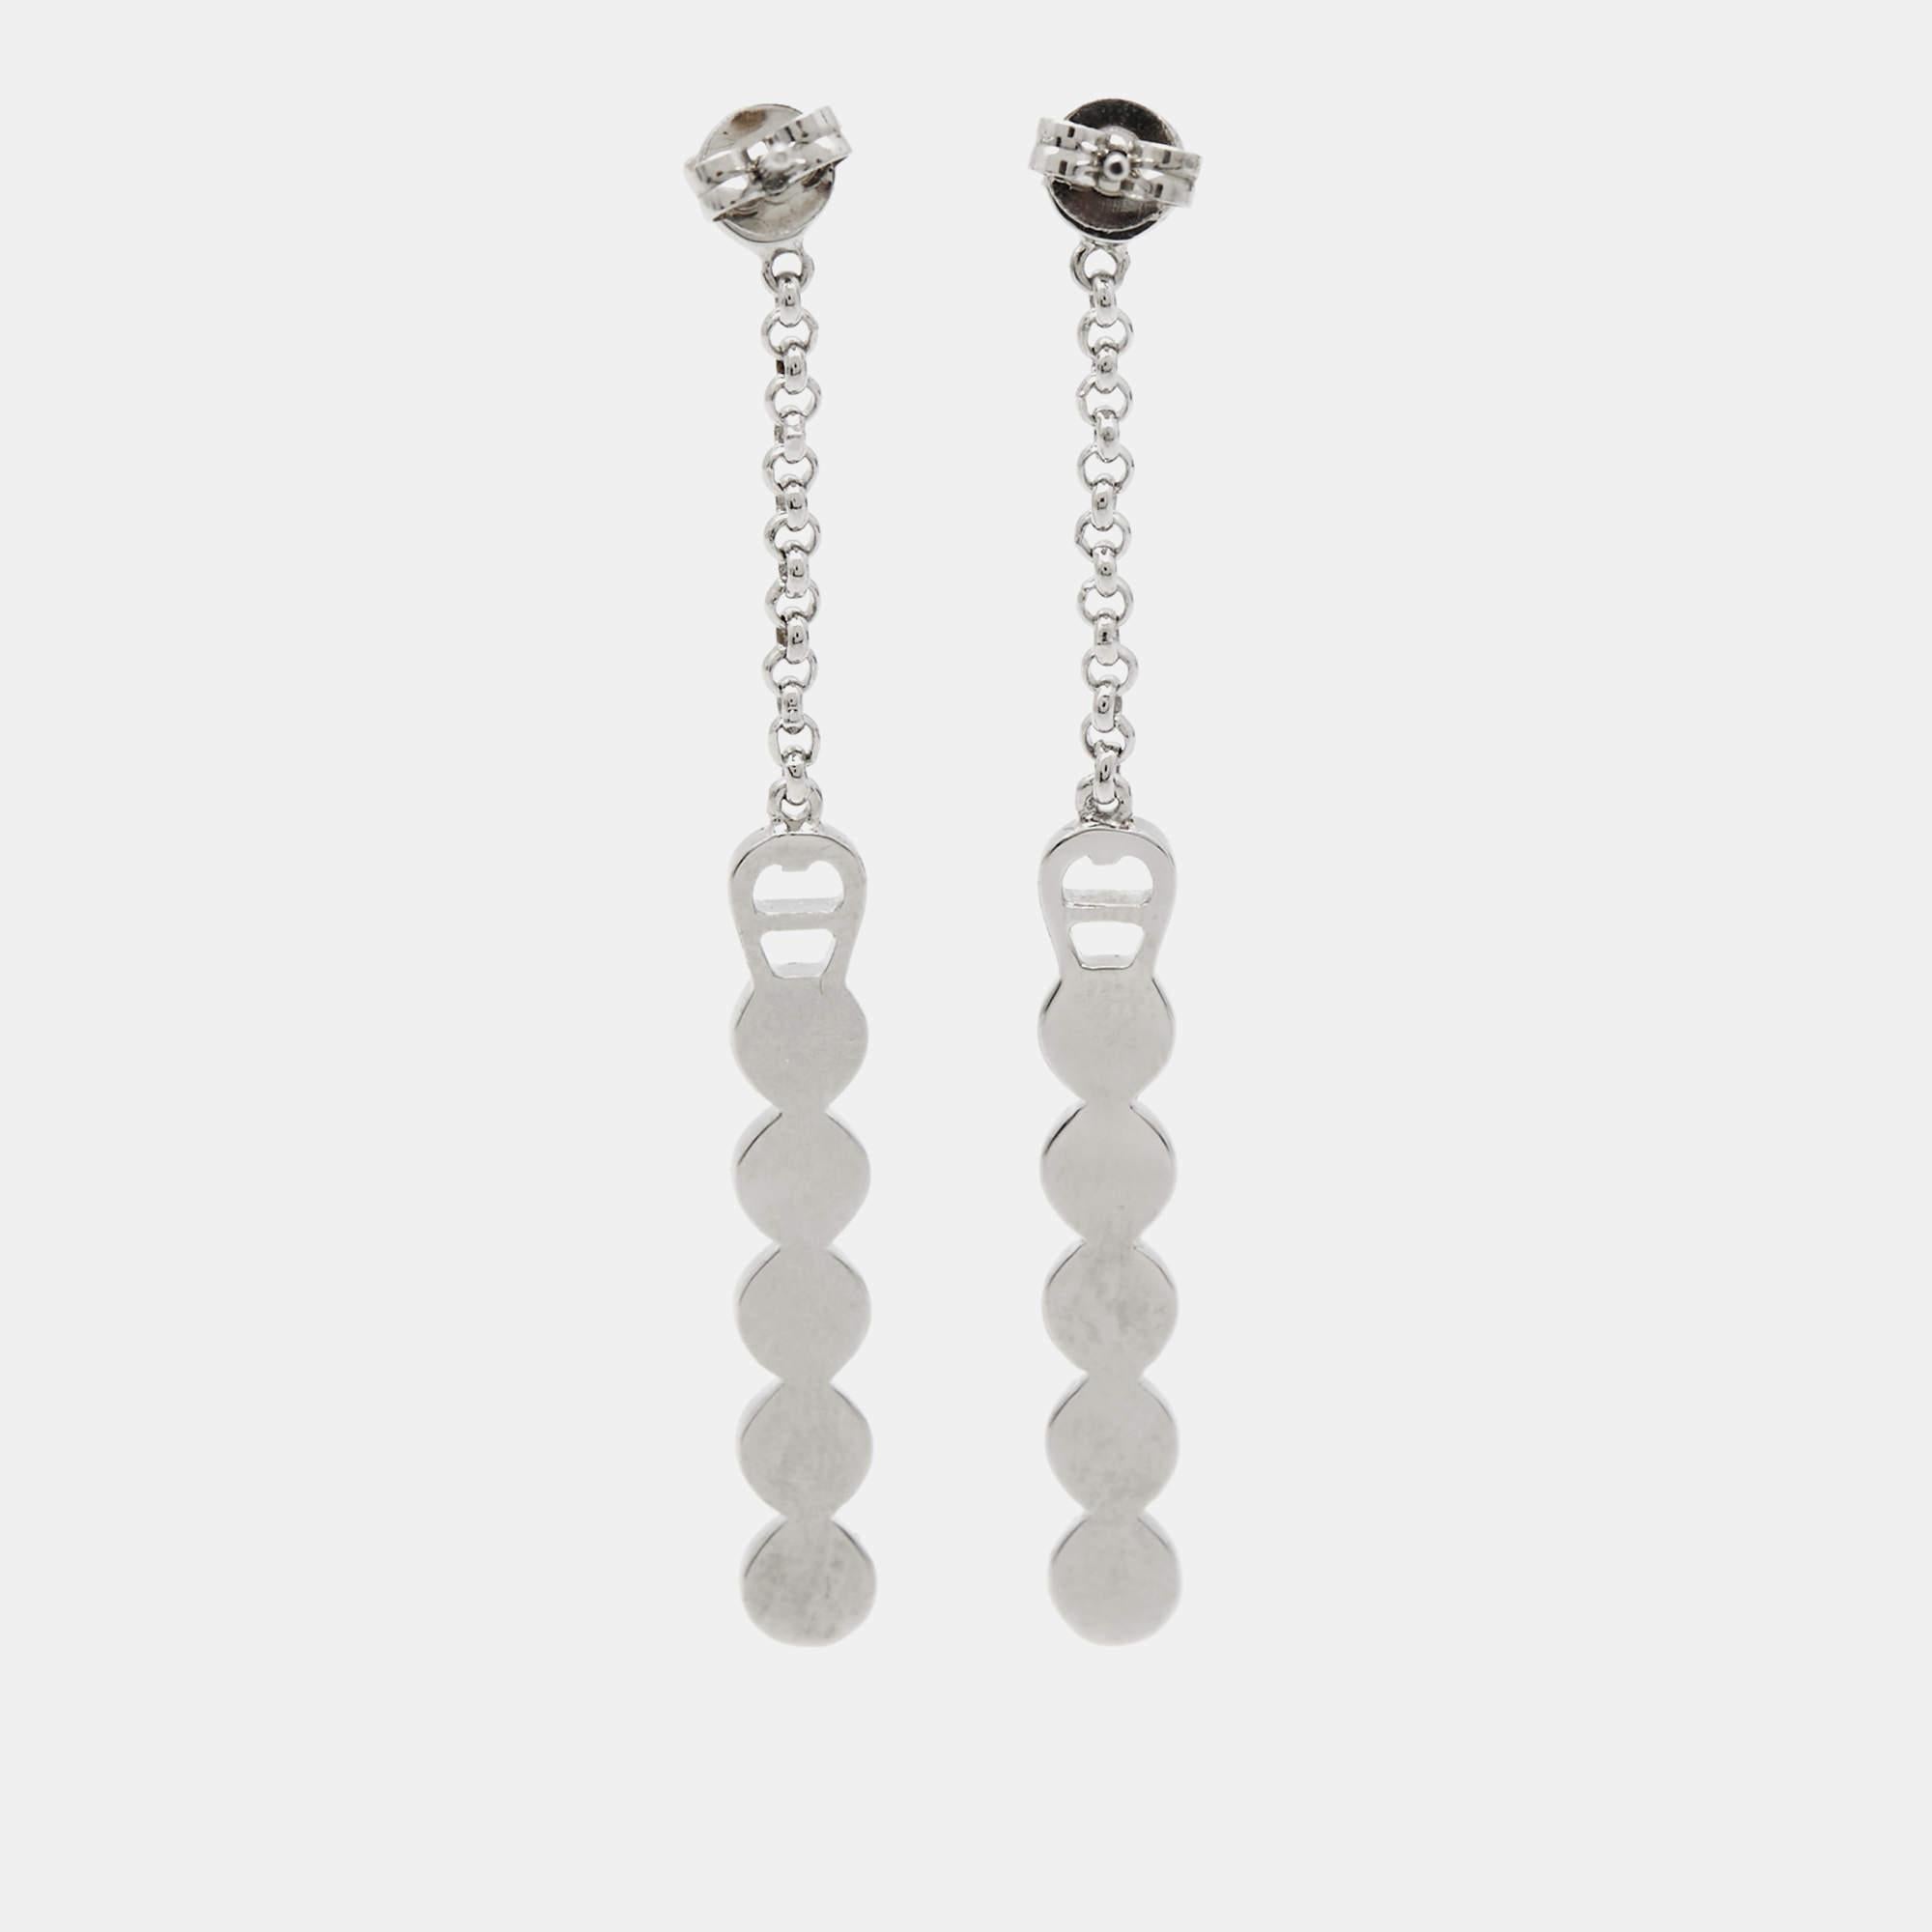 These stunning earrings are elegant and fabulous. Crafted from silver-tone metal, they are the perfect accessory to add that contemporary touch to your look.

Includes
Original Dustbag